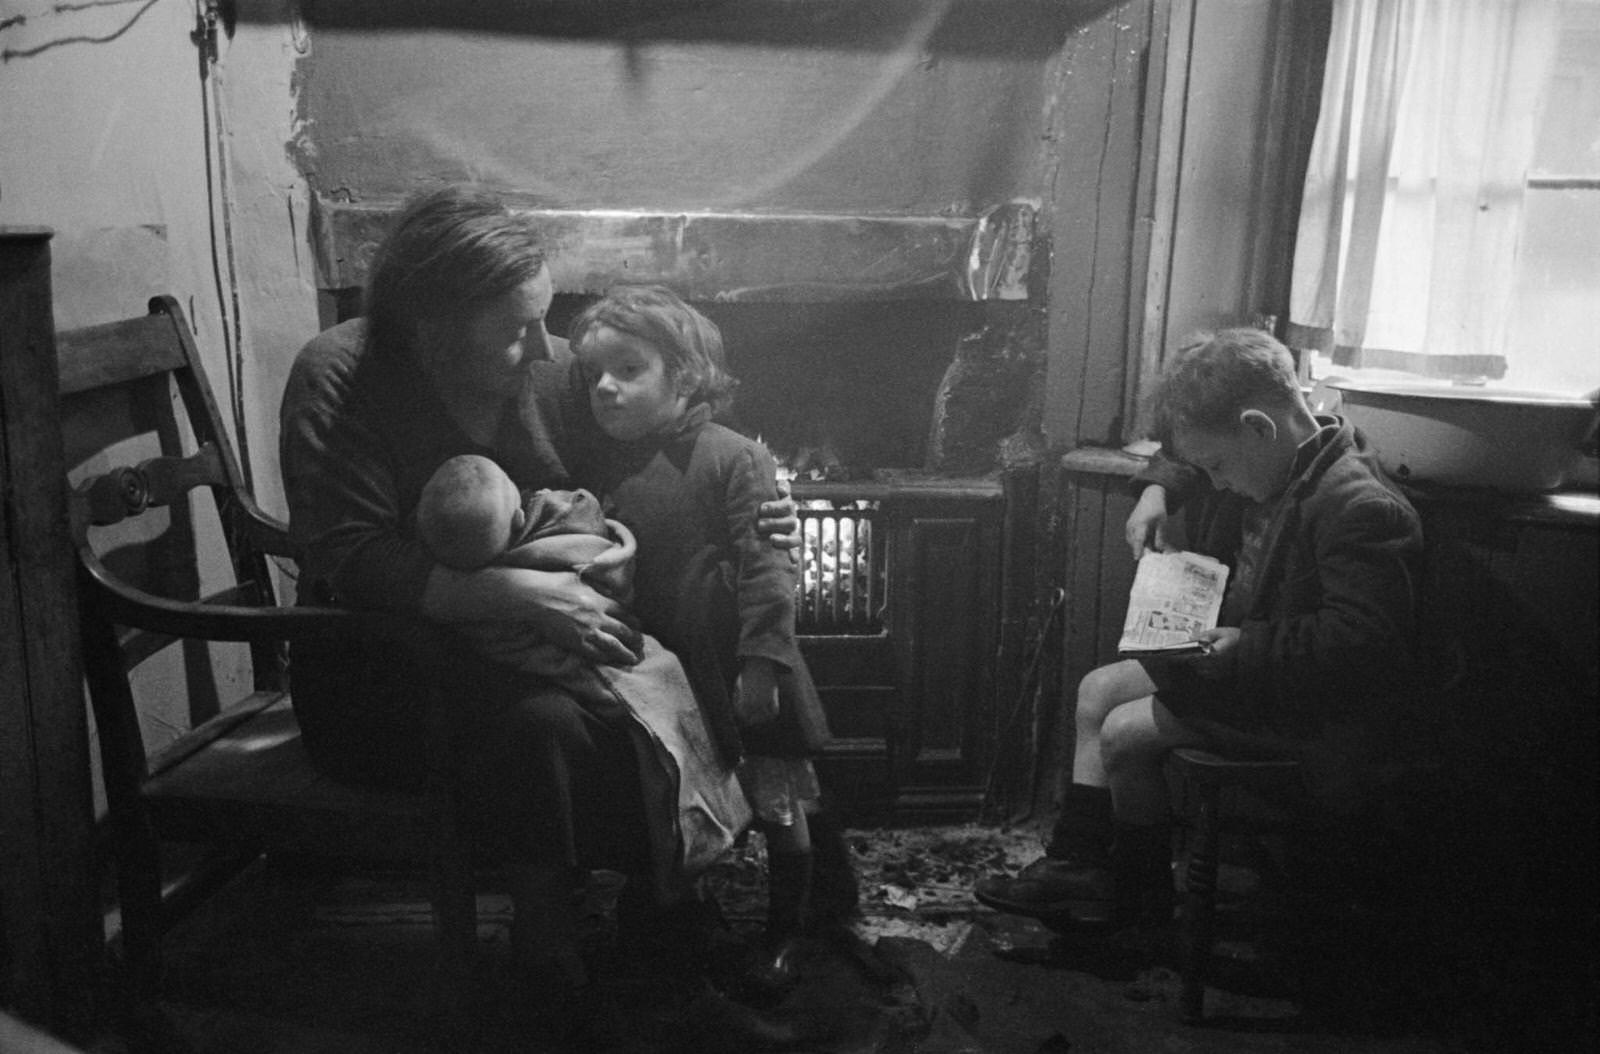 A family at home in the Gorbals area of Glasgow, 1948